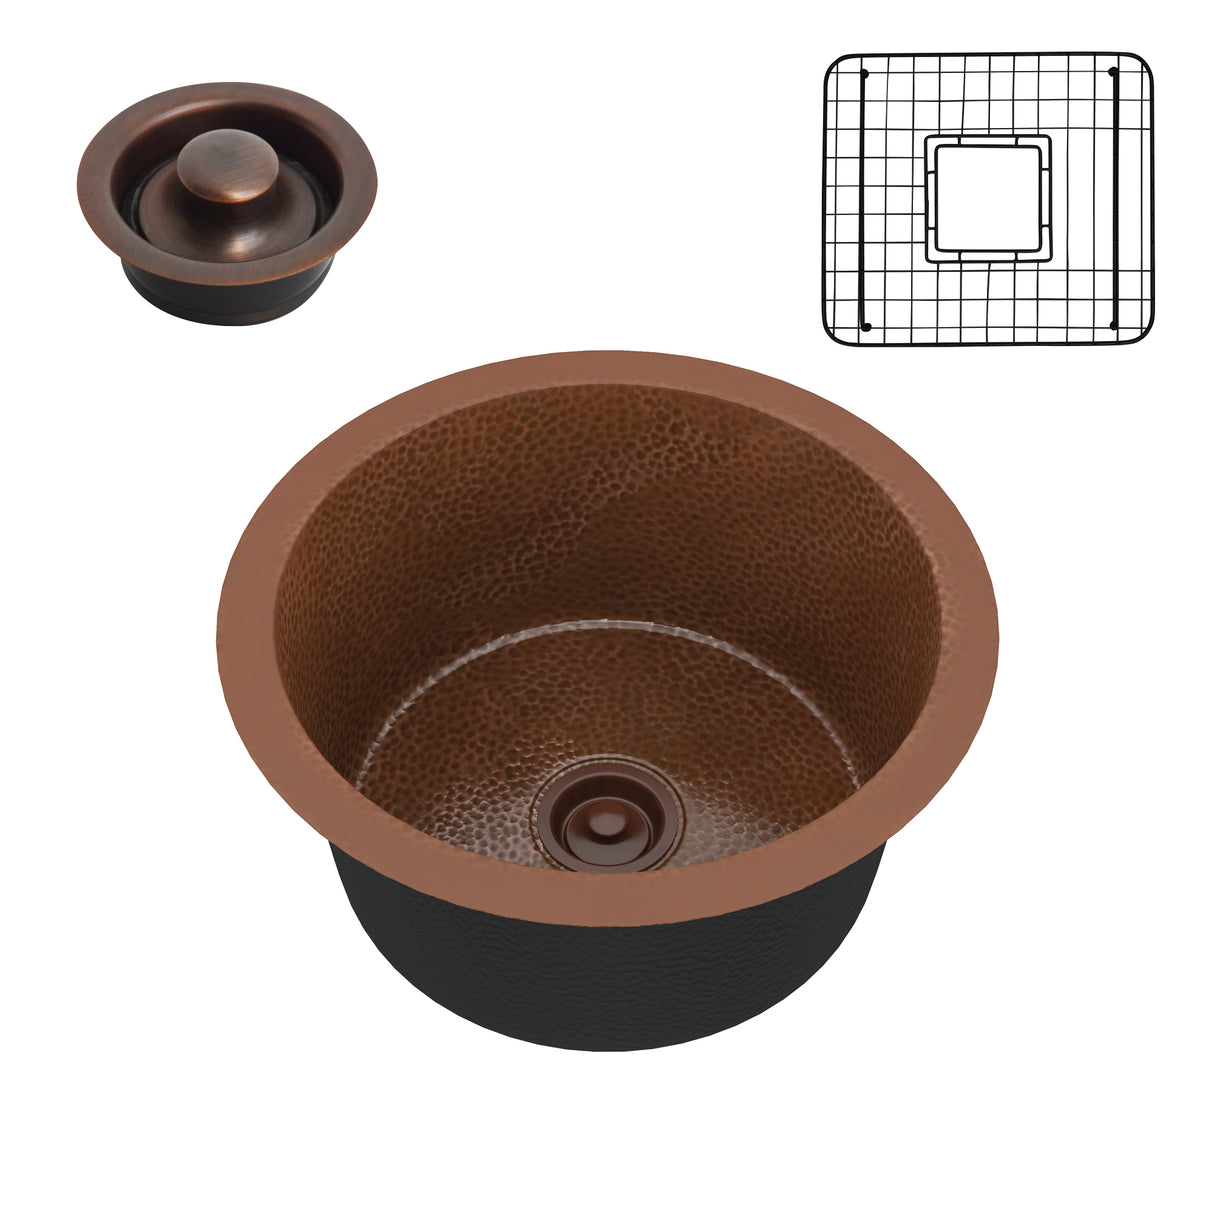 ANZZI SK-003 Thrace Drop-in Handmade Copper 17 in. 0-Hole Single Bowl Kitchen Sink in Hammered Antique Copper